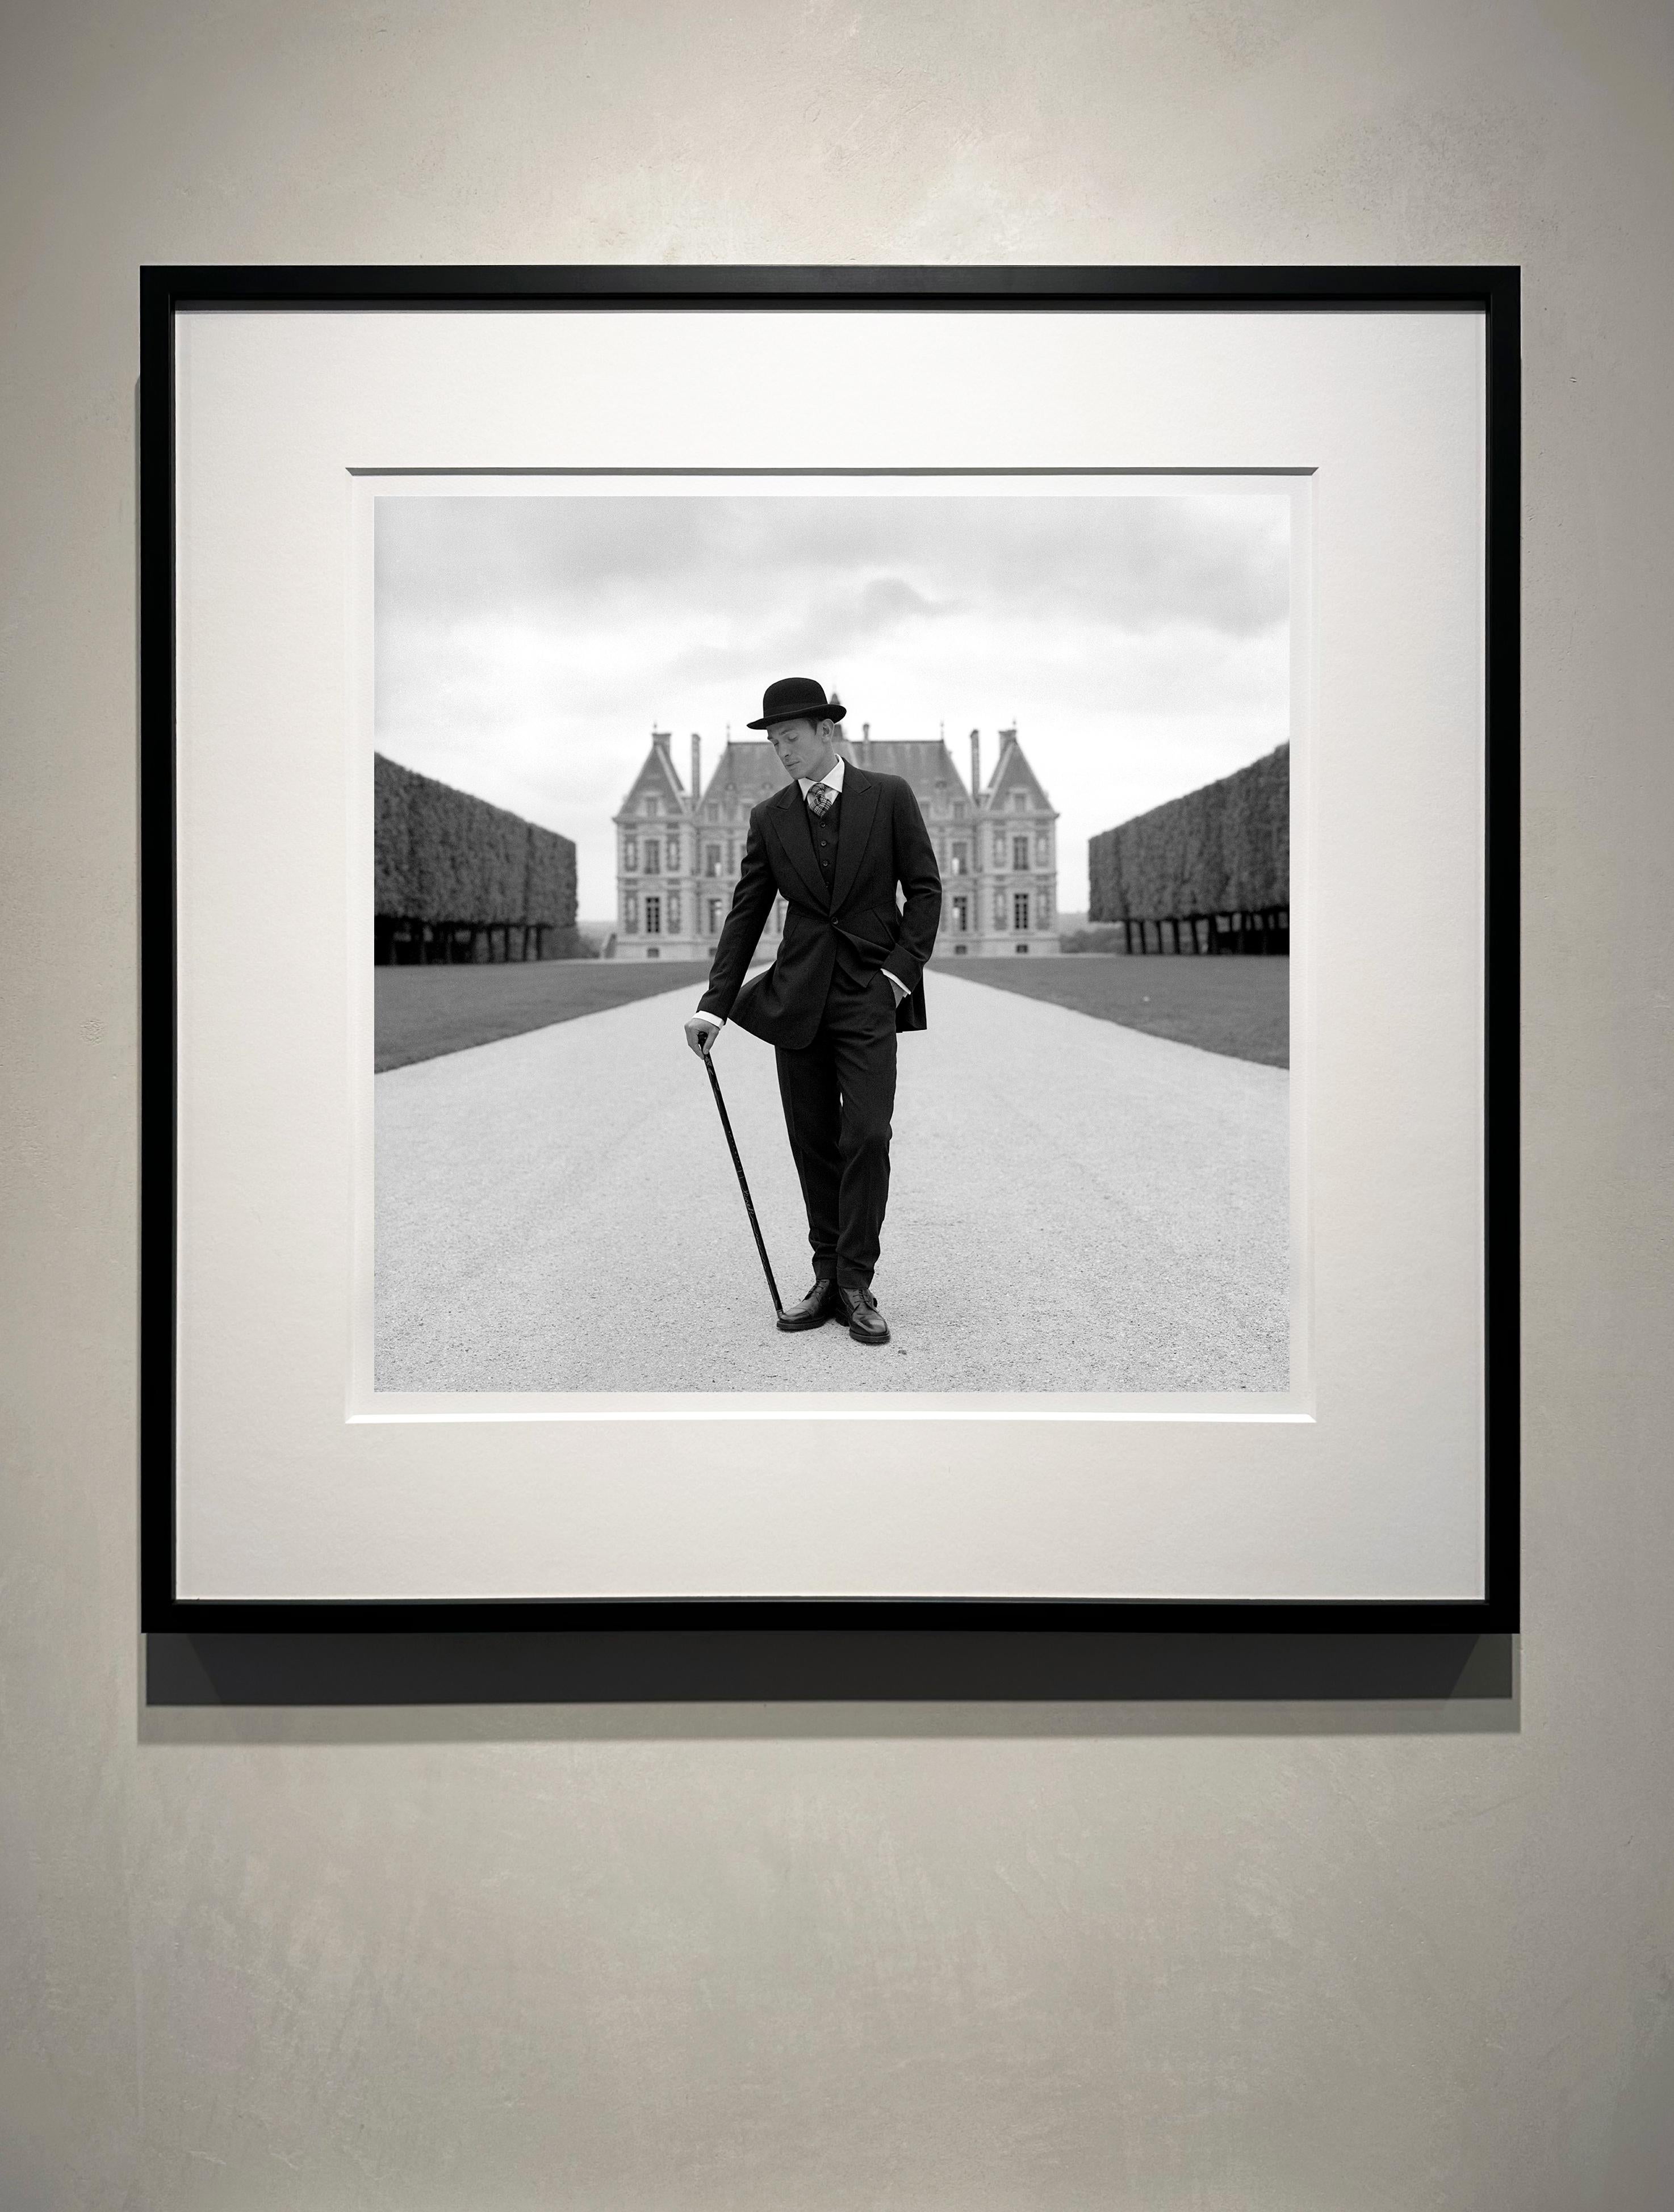 Gary with Cane, Parc de Sceaux, France - 30 x 30 inches, FRAMED - Photograph by Rodney Smith